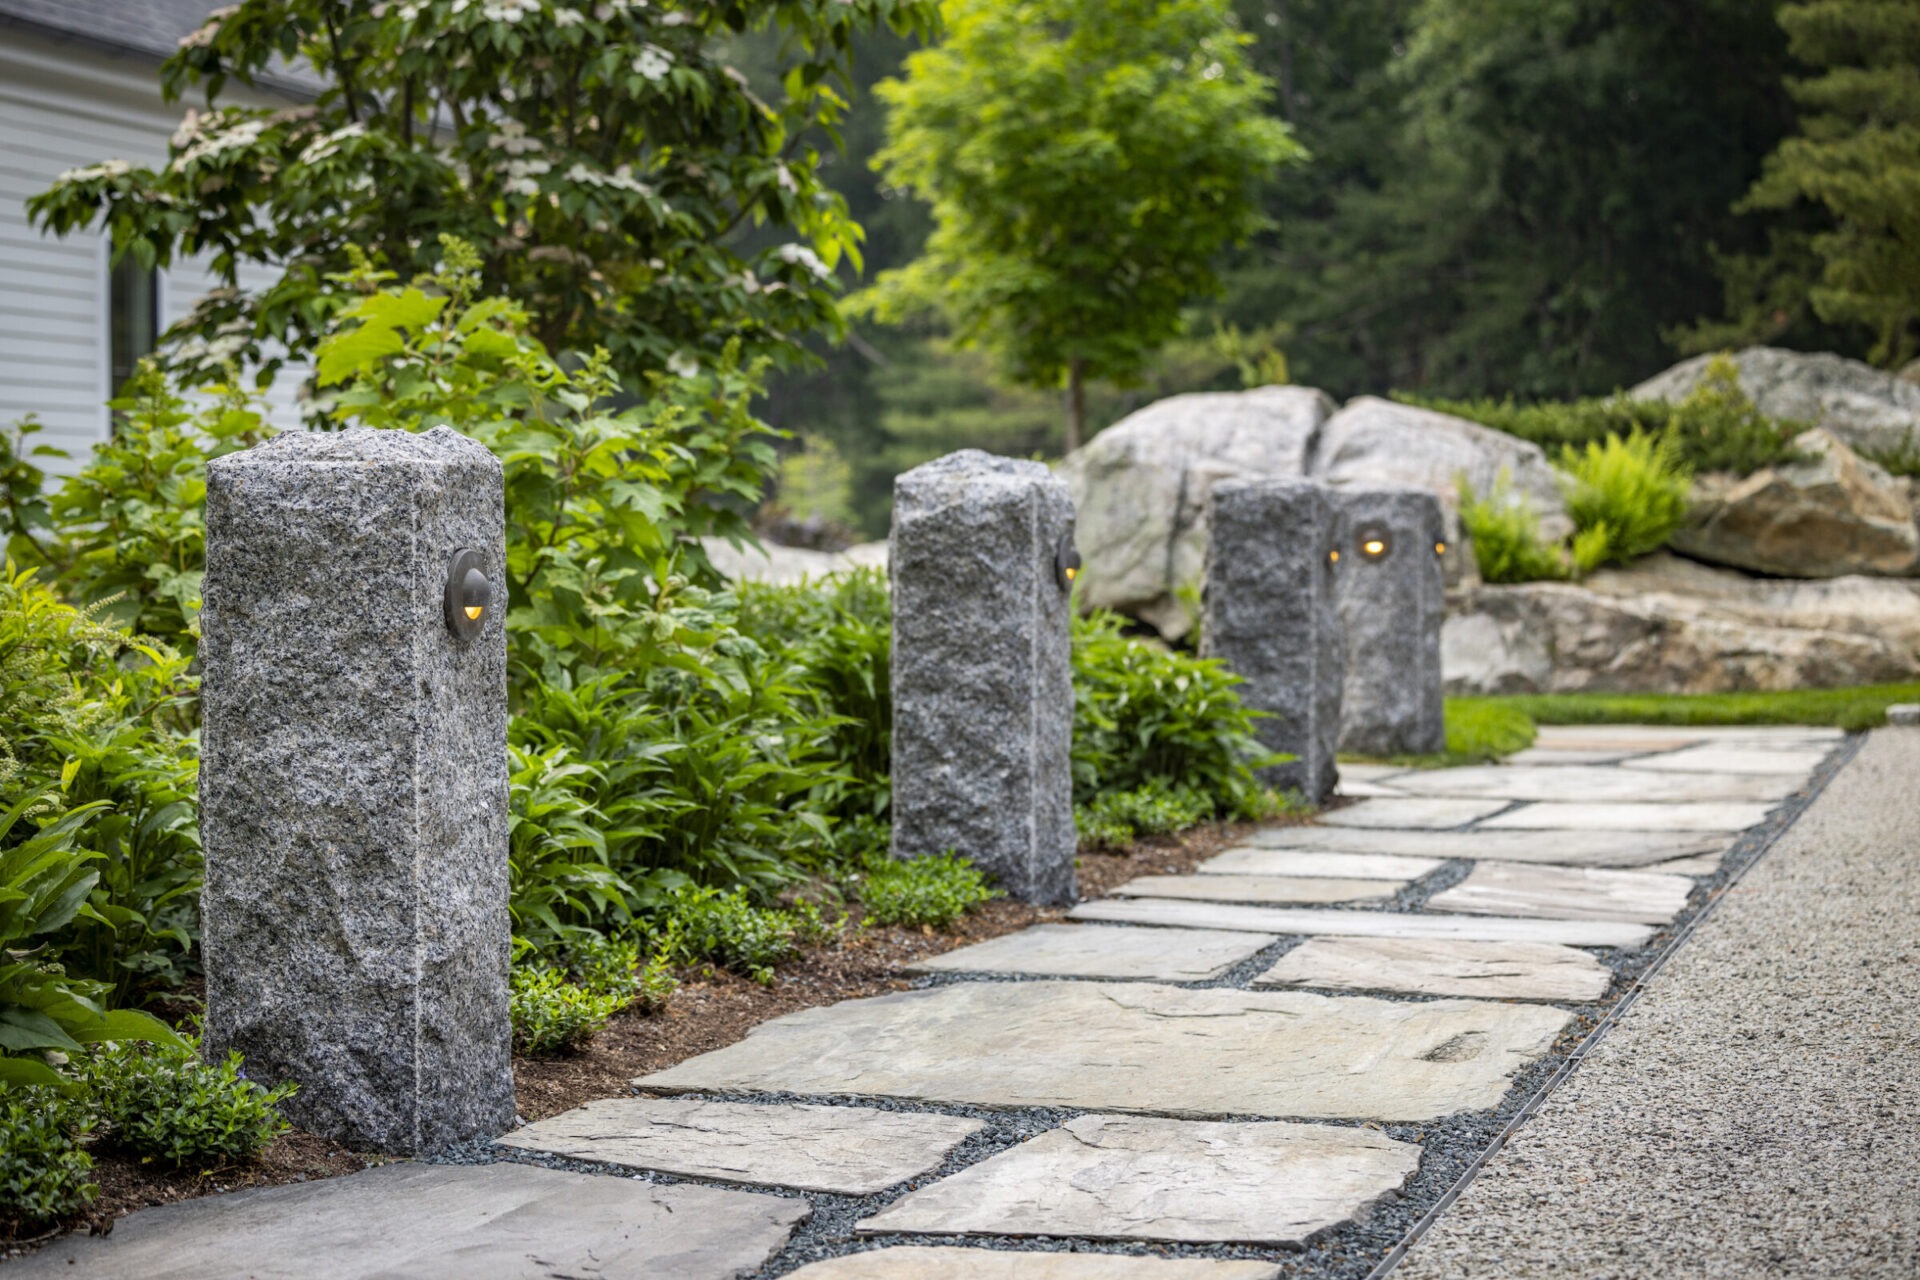 A landscaped pathway lined with gray stone posts featuring built-in lights. Green shrubbery and a large rock formation create a tranquil, natural setting.